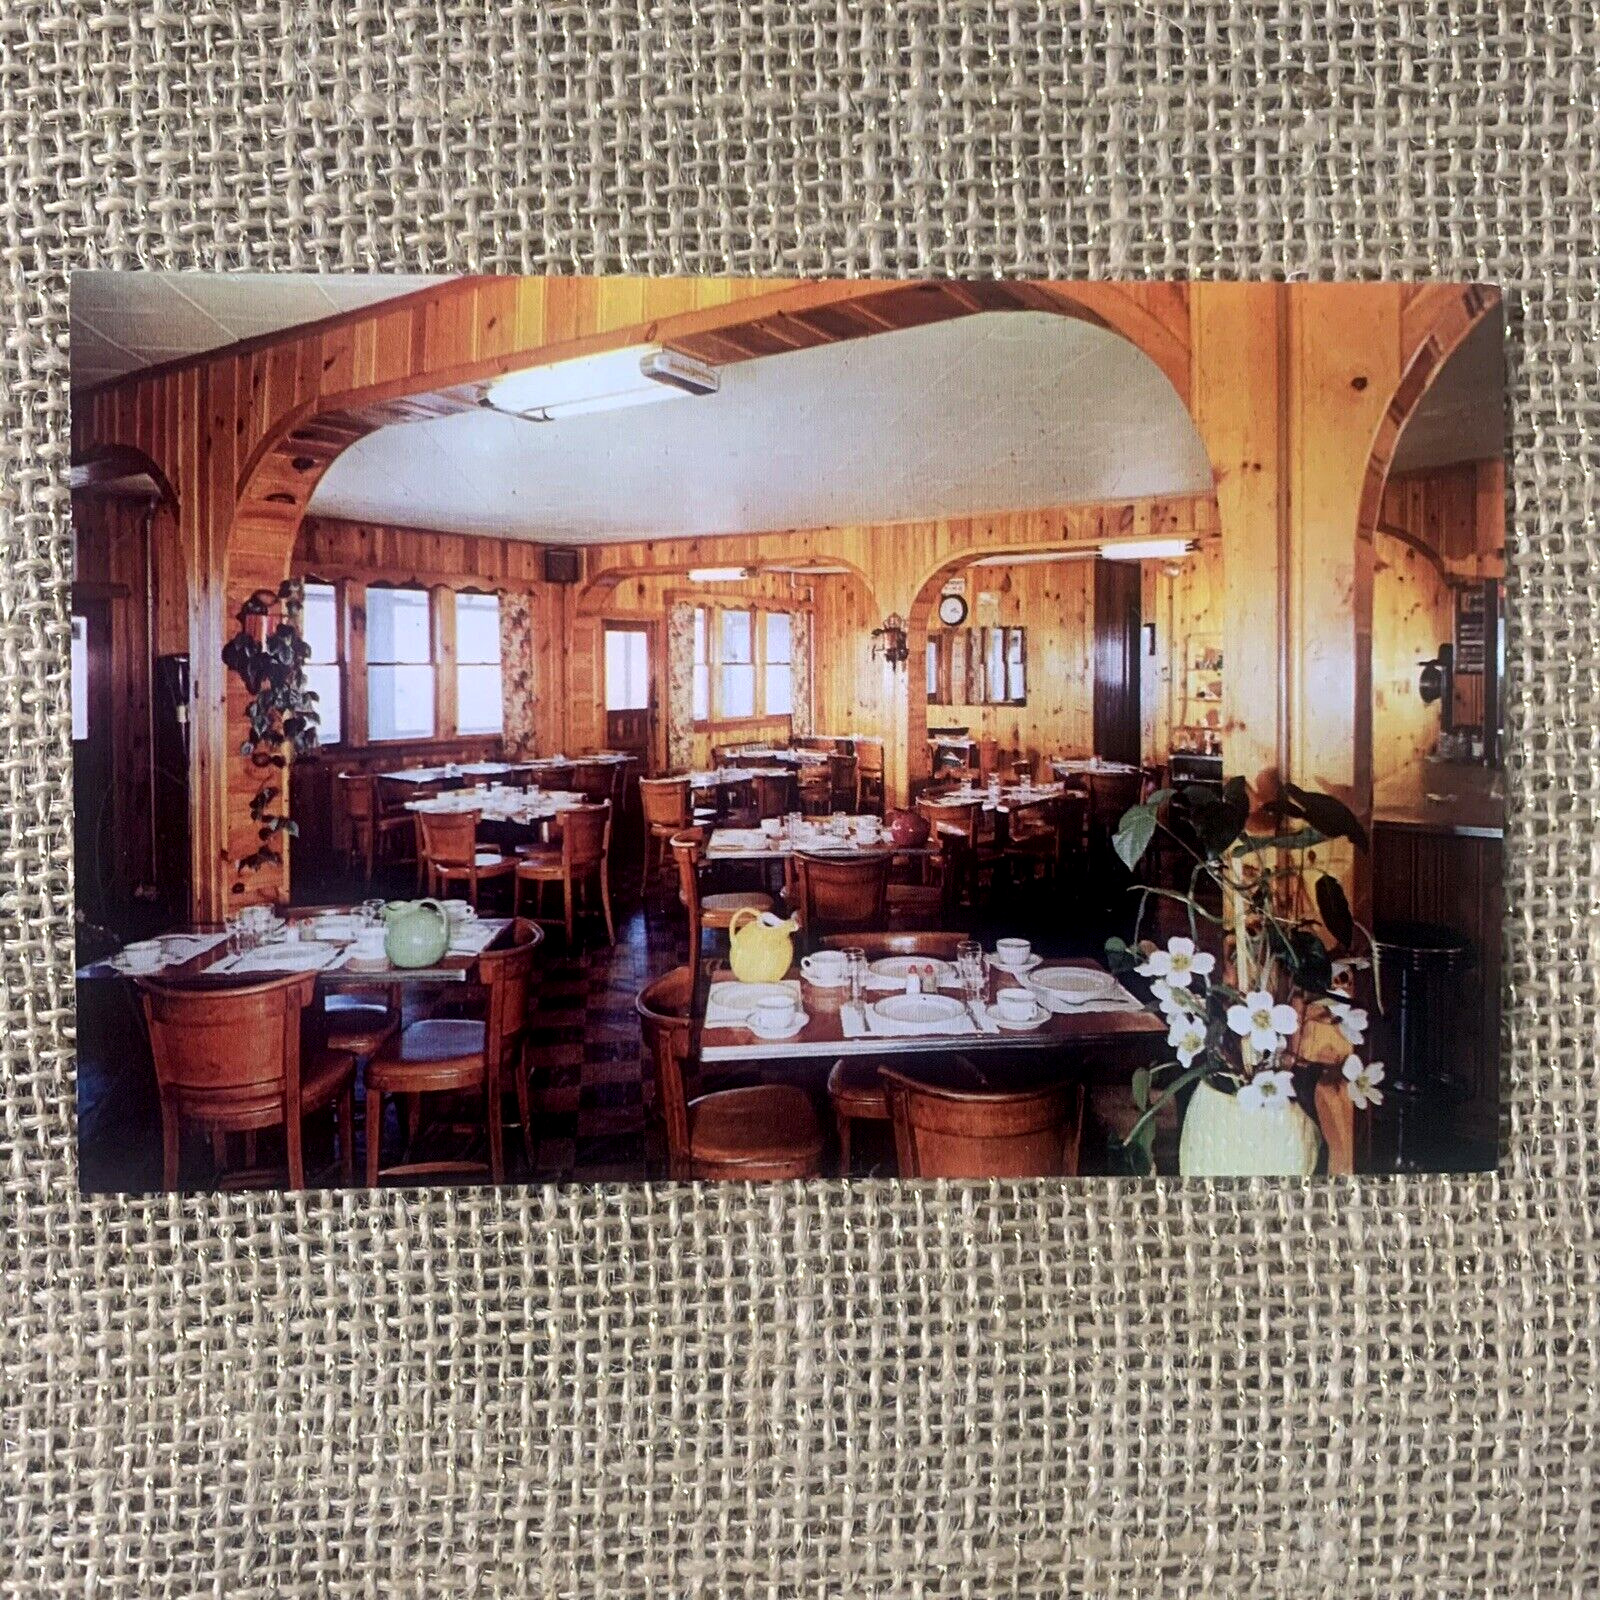 Knotty Pine Dining Room At White Beauty View Hawley Pennsylvania PA Postcard